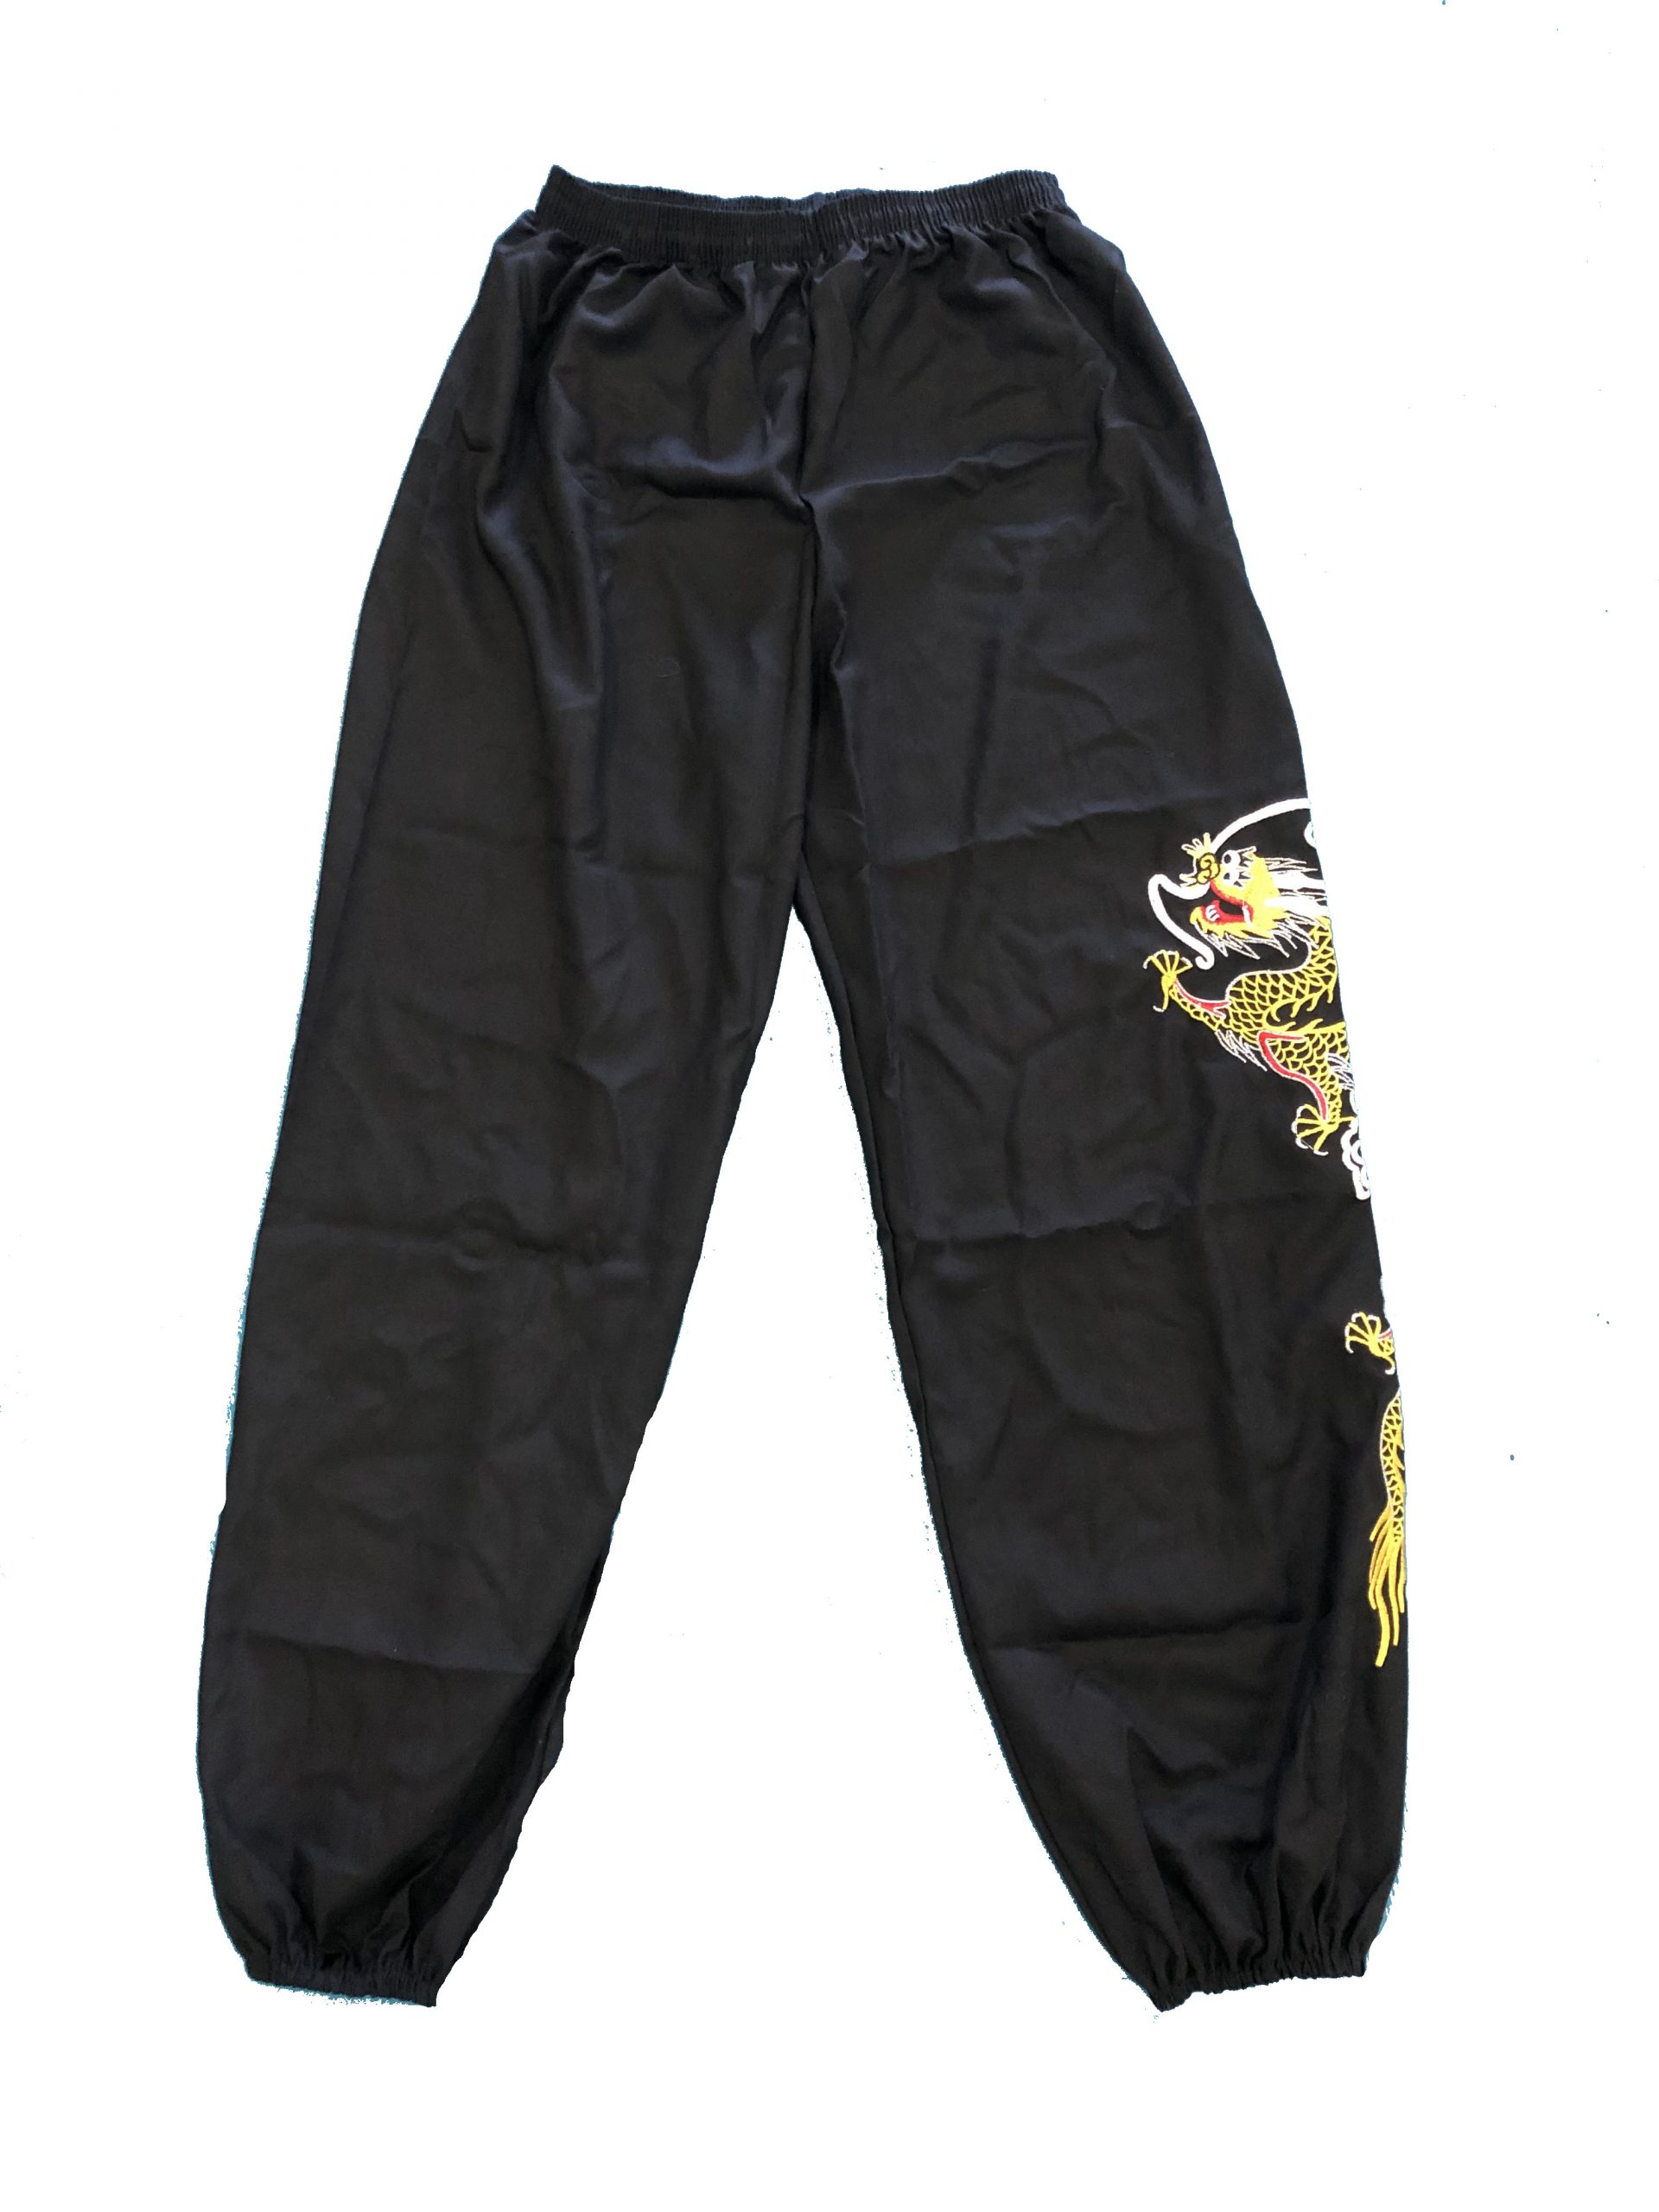 Aggregate more than 92 tai chi trousers super hot - in.cdgdbentre